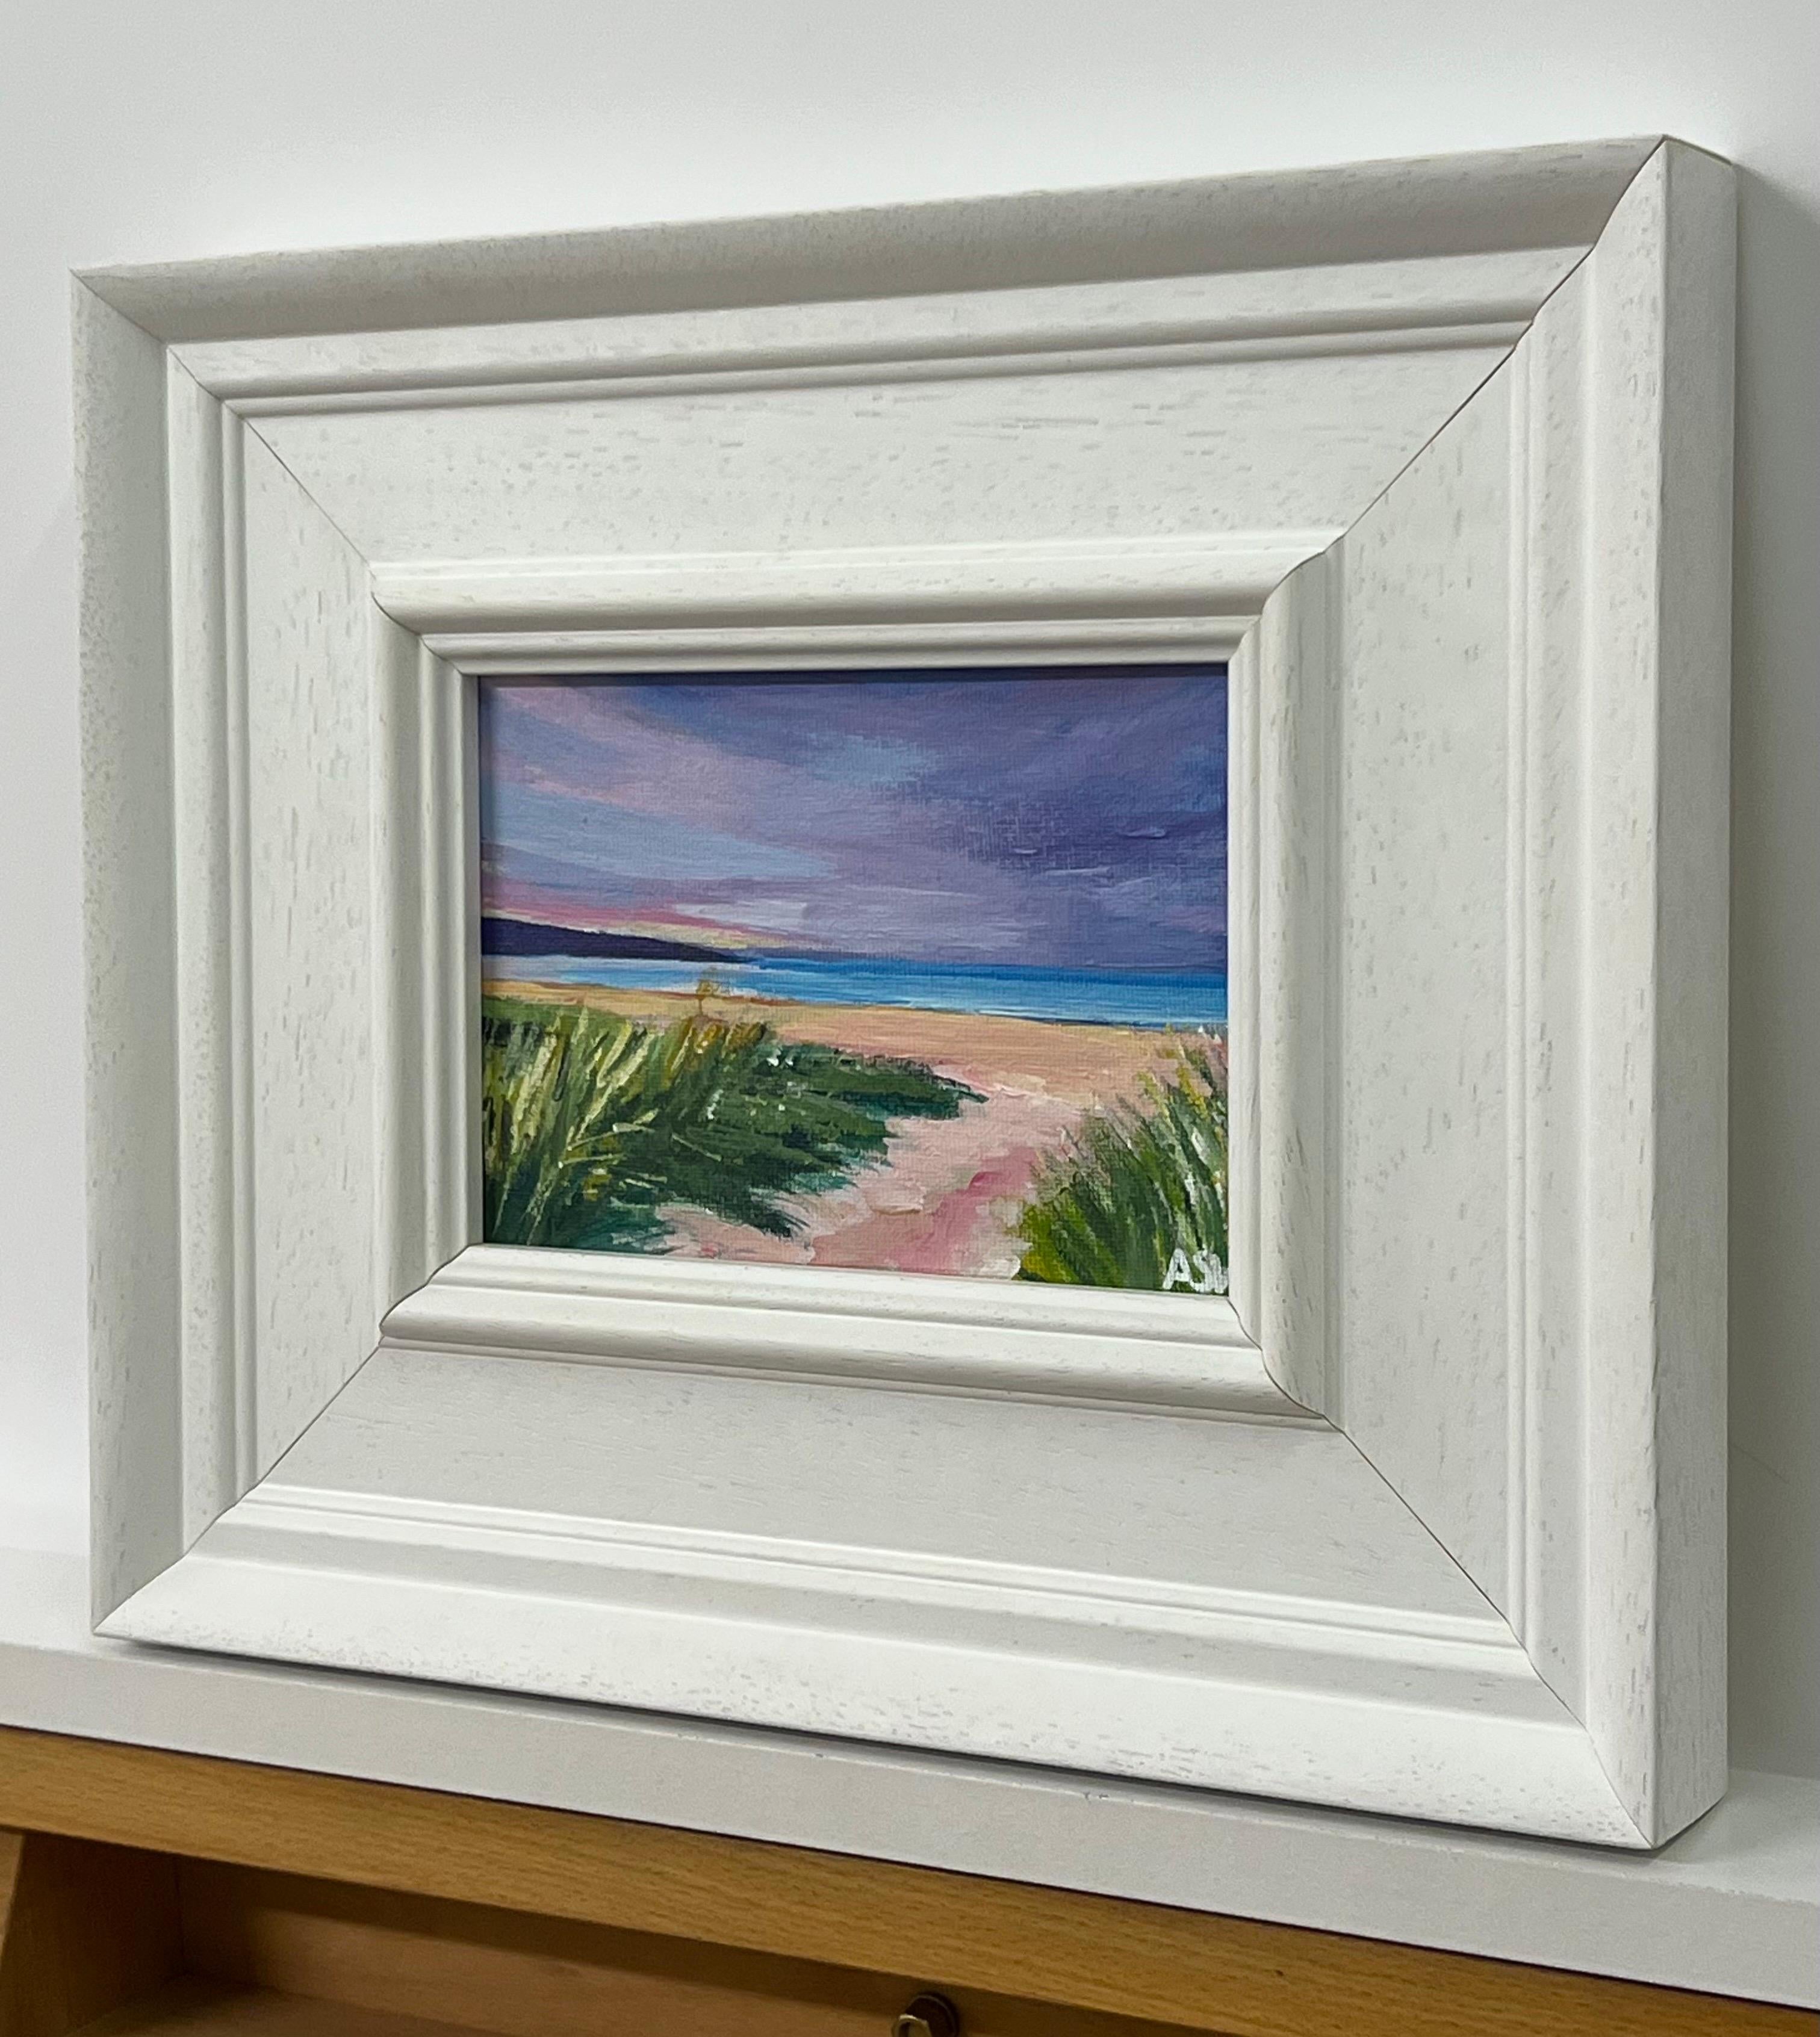 Miniature Beach Landscape of the East Coast of the Scottish Highlands by Contemporary British Artist Angela Wakefield. Brora Beach, Scotland. 

Art measures 7 x 5 inches
Frame measures 12 x 10 inches 

Angela Wakefield has twice been on the front